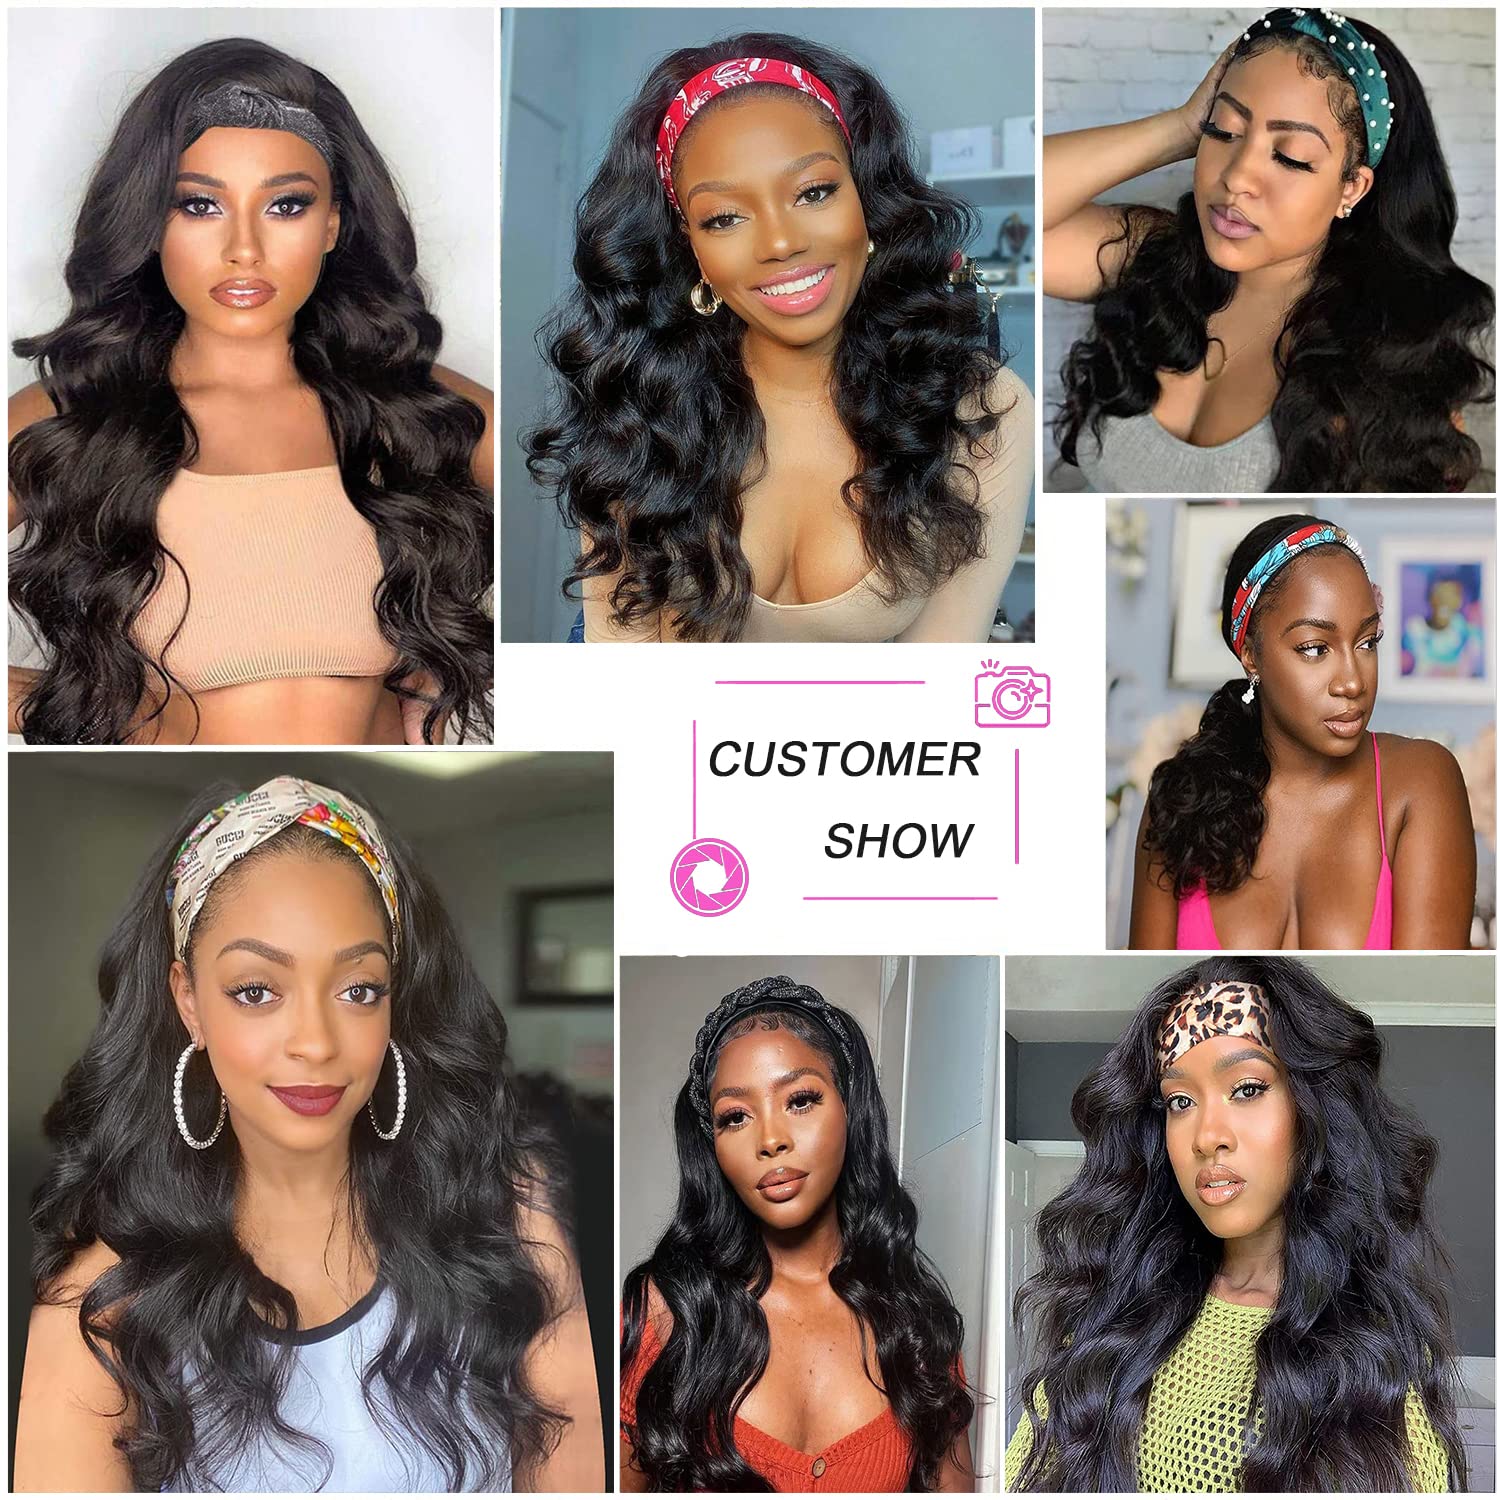 Body Wave Headband Wigs for Women Synthetic Blonde Highlight Long Wavy Headband Wig with Headband Attached 22inch Machine Made Glueless None Lace Front Wigs 180% Density(22inch,HL6/3027#)